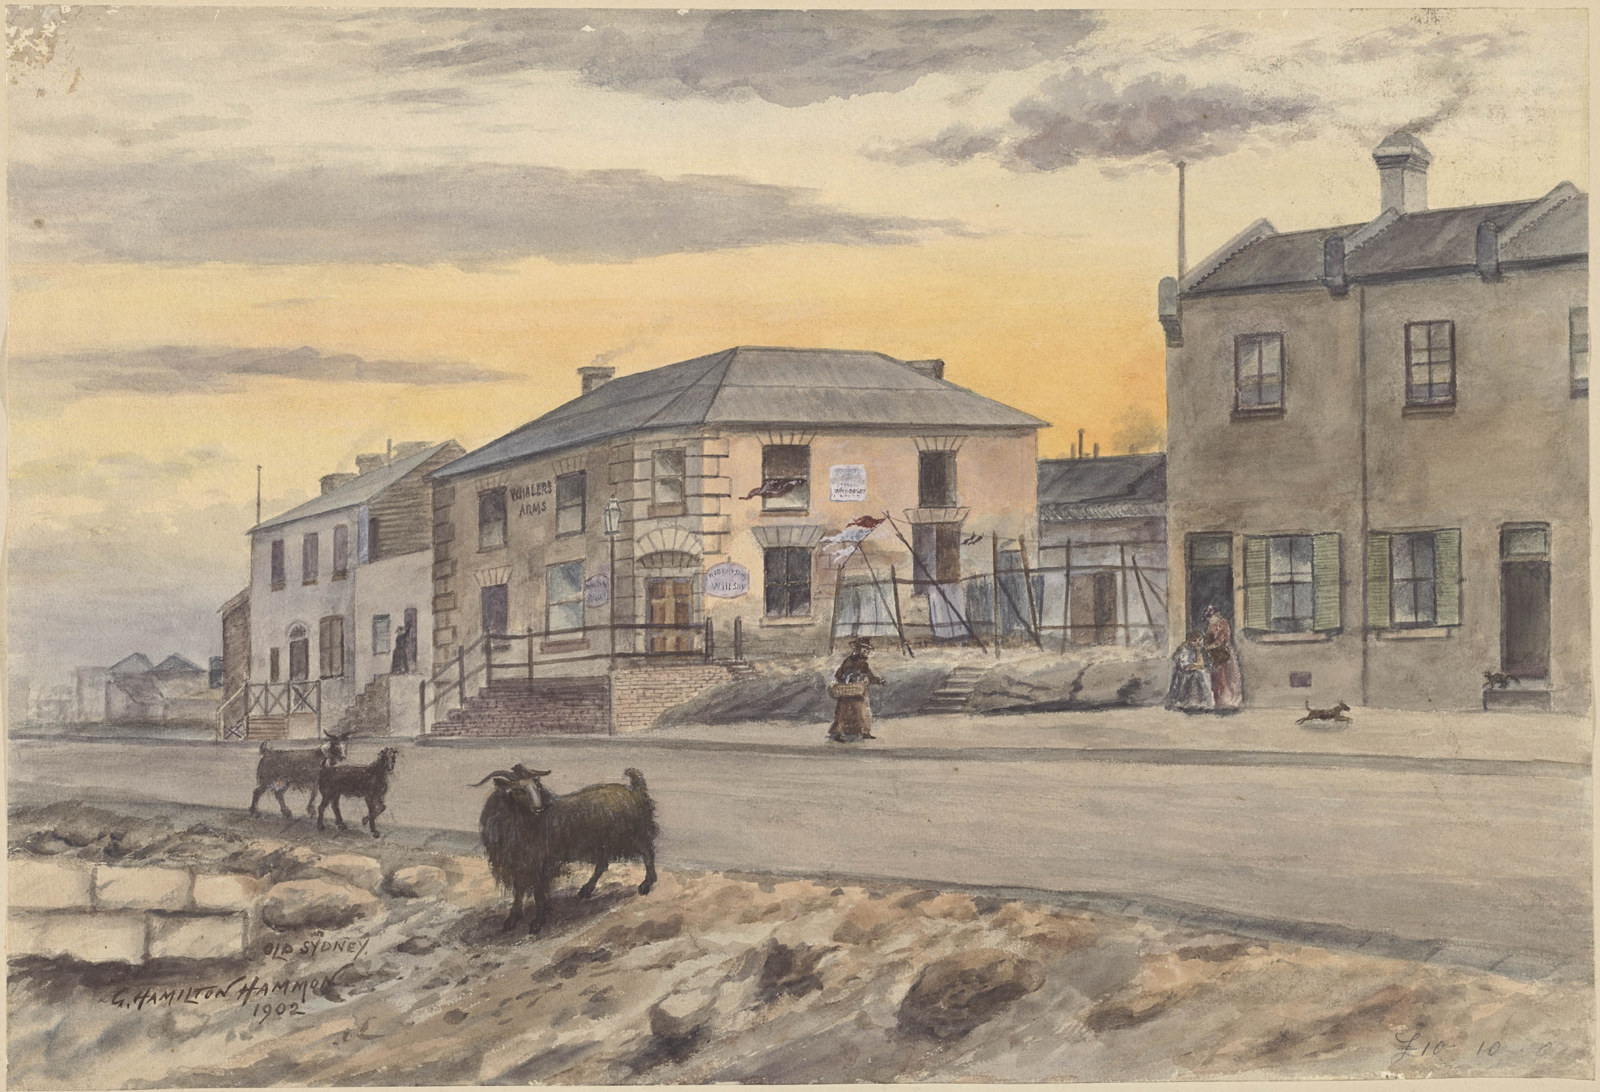 Painting of a street scene showing two storey buildings on the high side of a dirt road. One the low side in the foreground a goat grazes amongst the rocks..